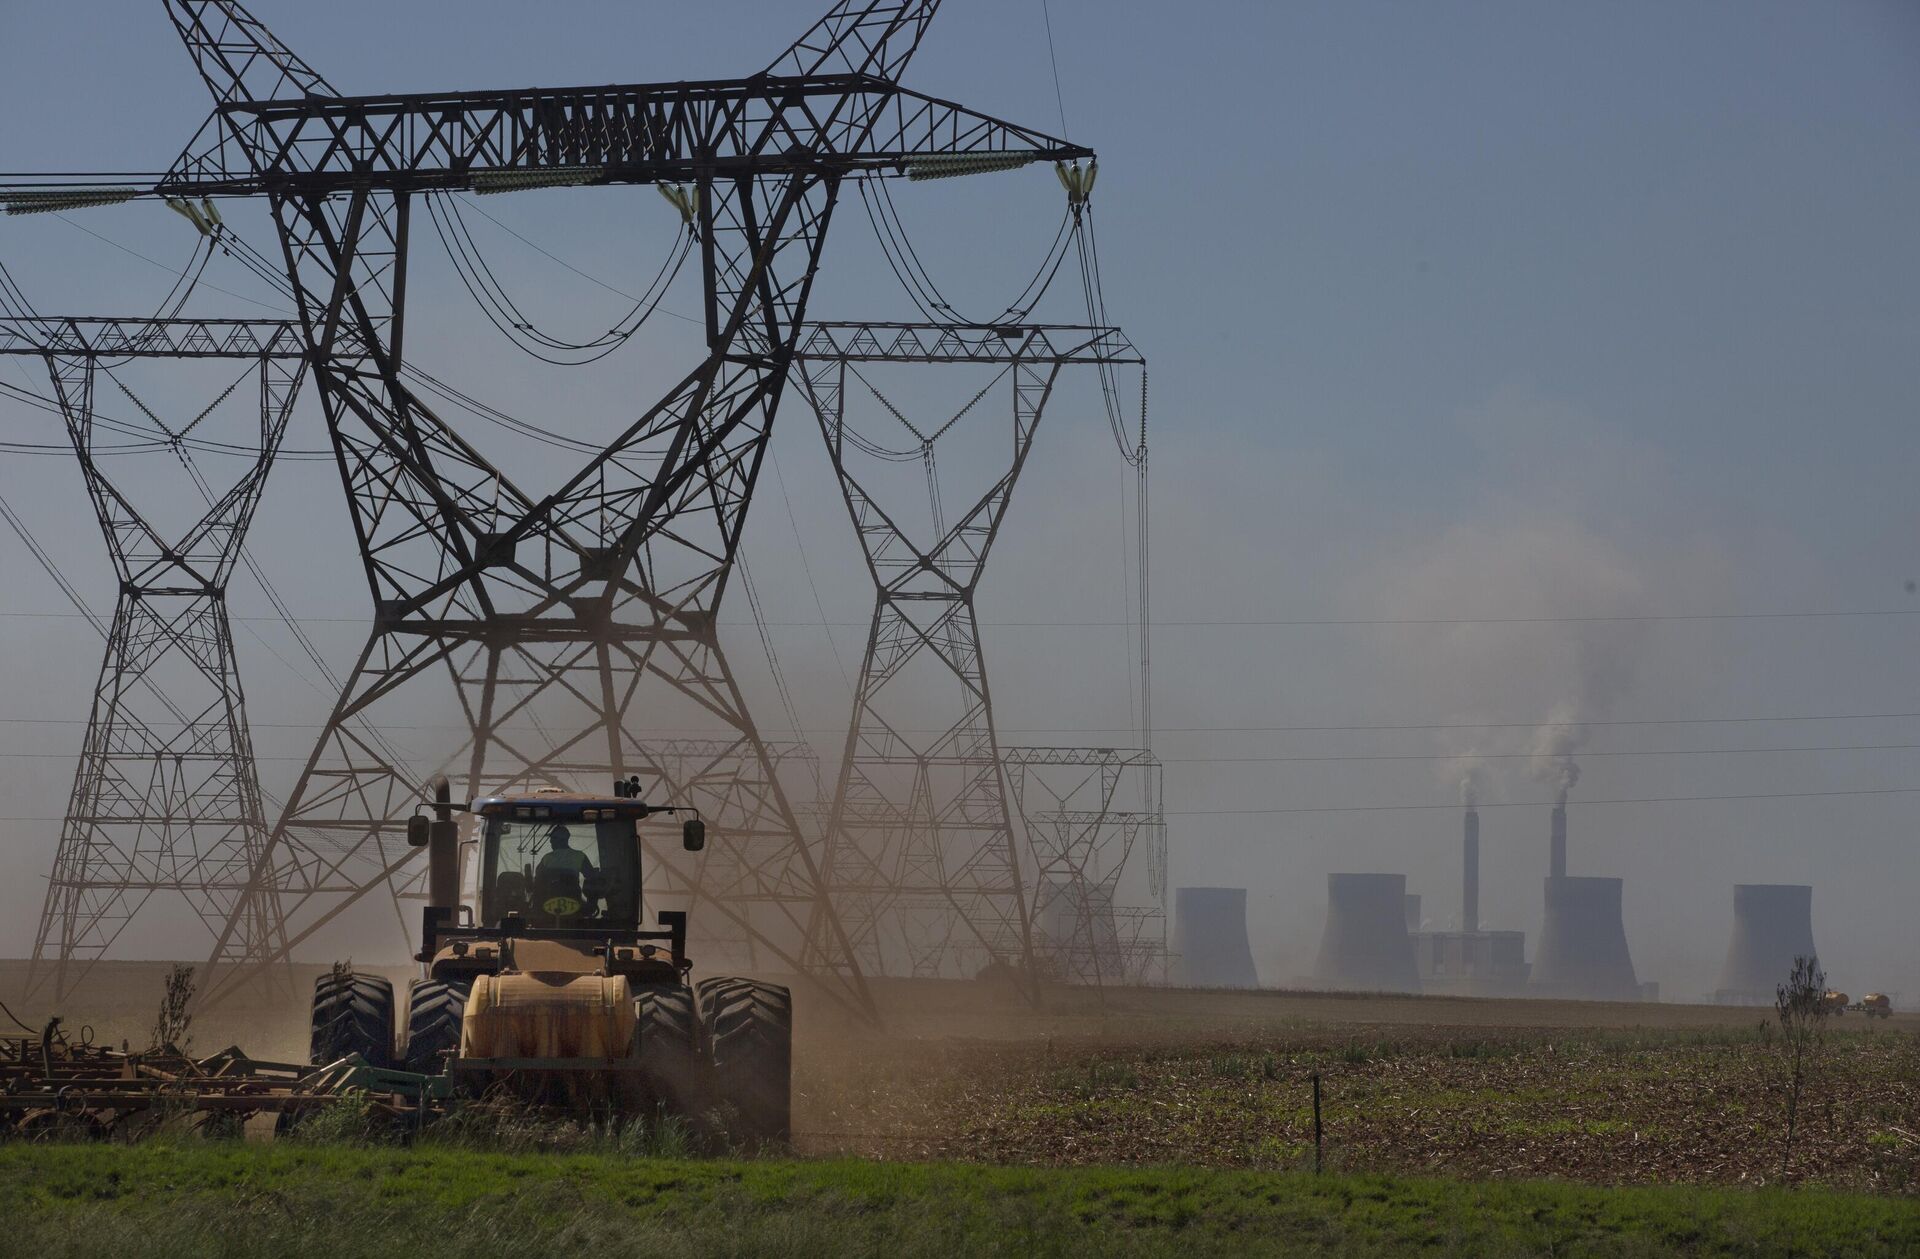 The land is ploughed under electrical pylons leading from a coal-powered electricity generating plant east of Johannesburg, Thursday, Nov. 17 2022. - Sputnik International, 1920, 16.12.2022